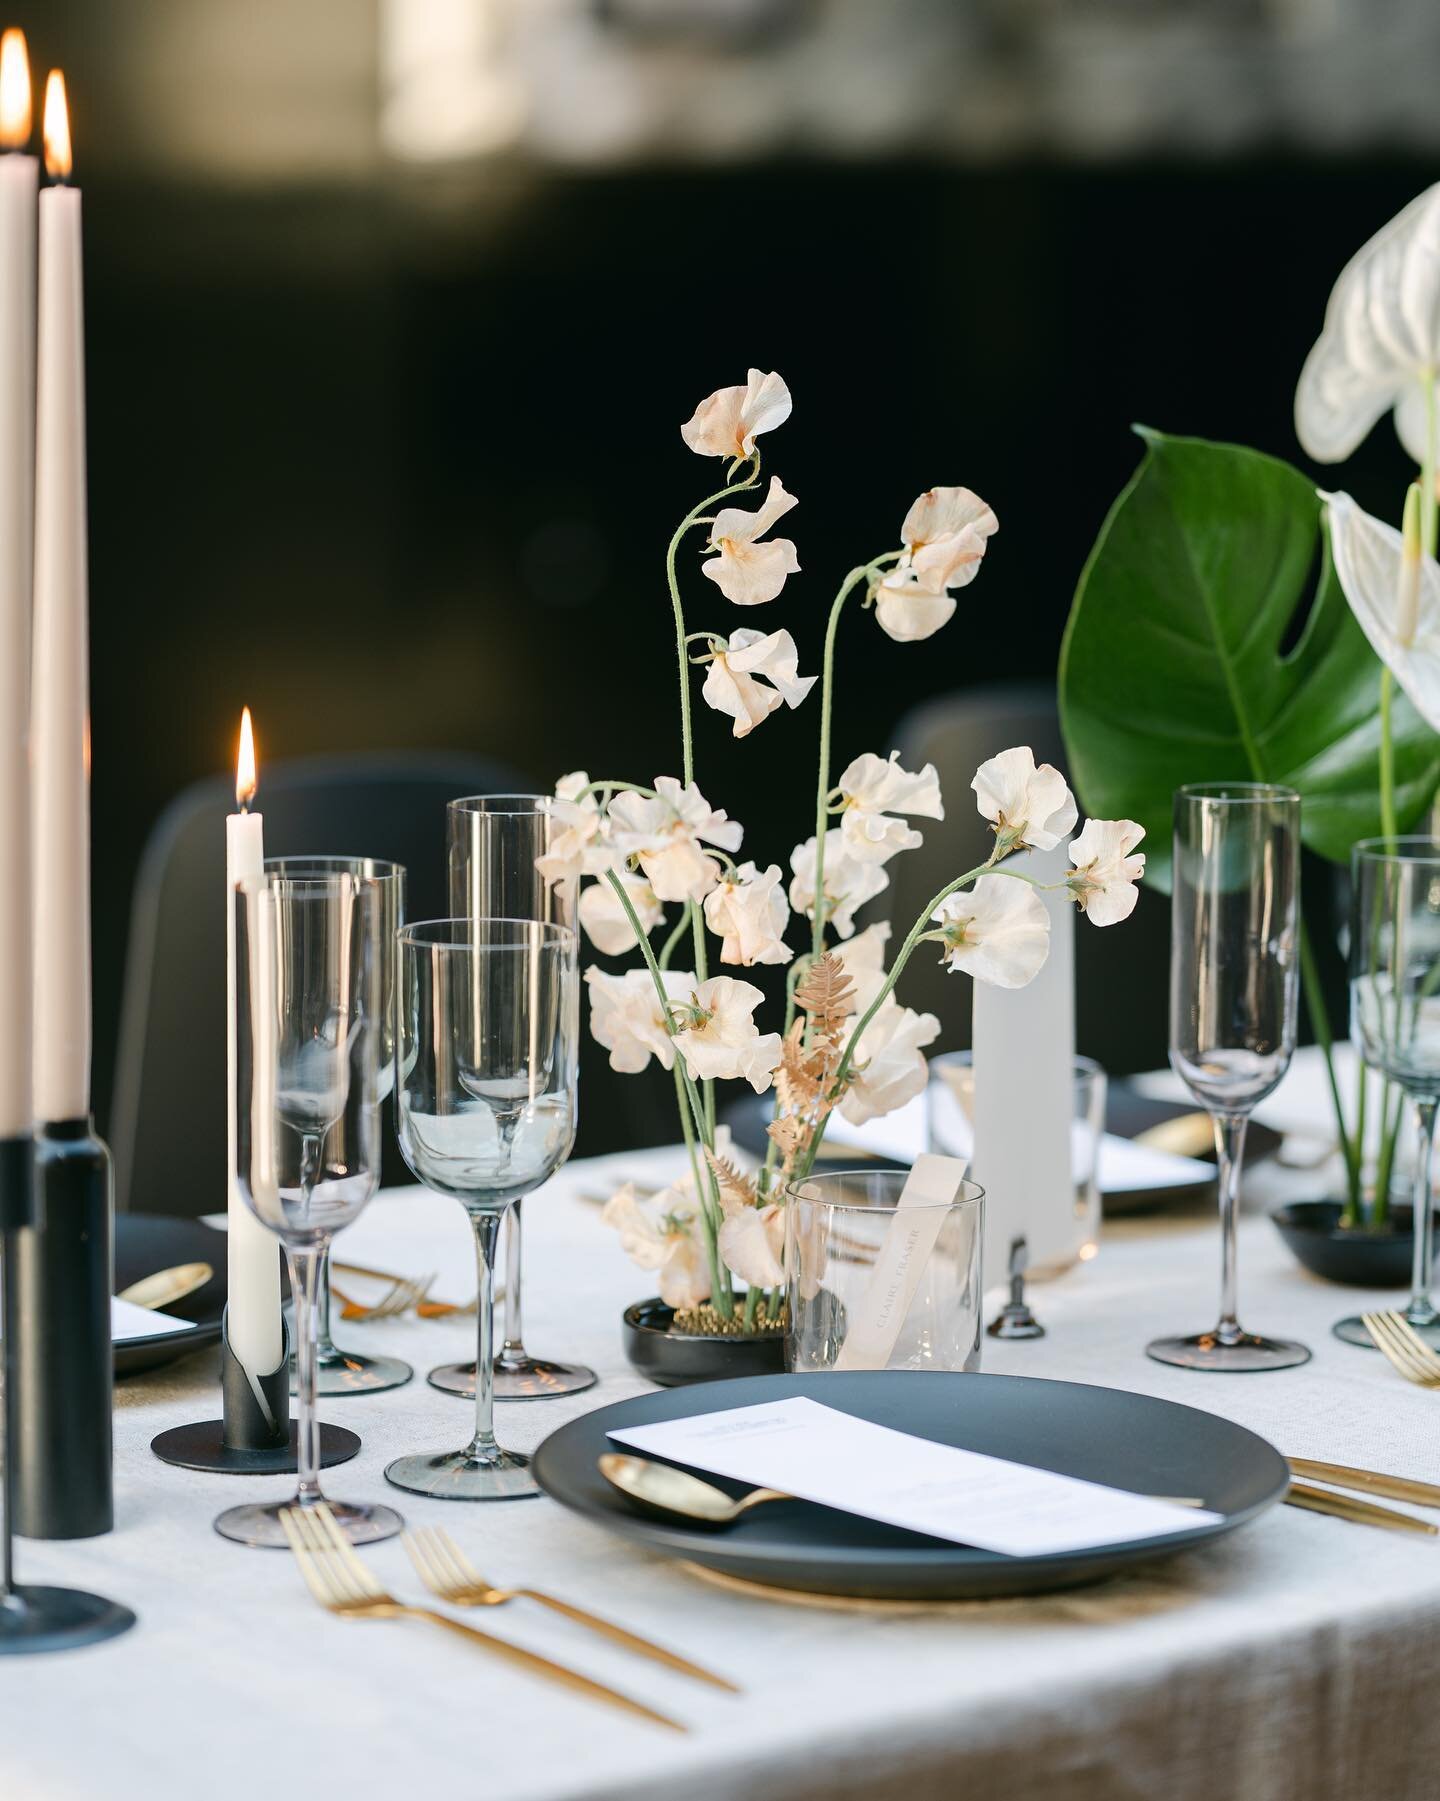 If you thought we loved modern table settings then, just you wait for what we have in store for 2023. The meaning behind setting our tables just got even more special. Exciting news coming next week! Link in bio to sign up for our newsletter so you d